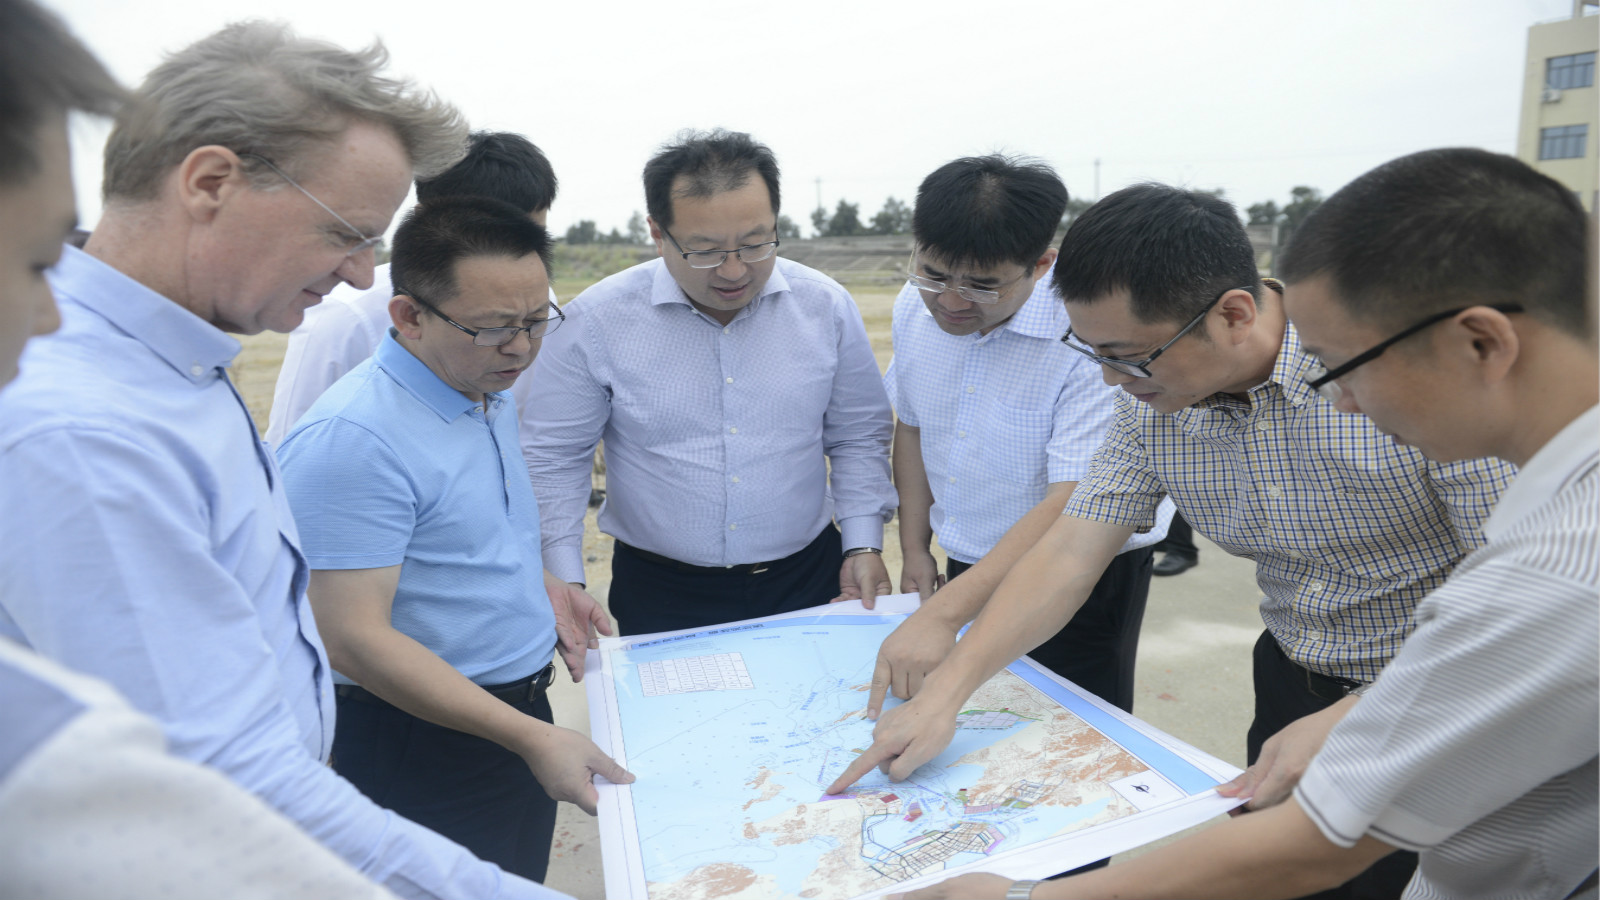 Chief Executive Officer Mr. Xu Changning led the visit of Hanas Putian project